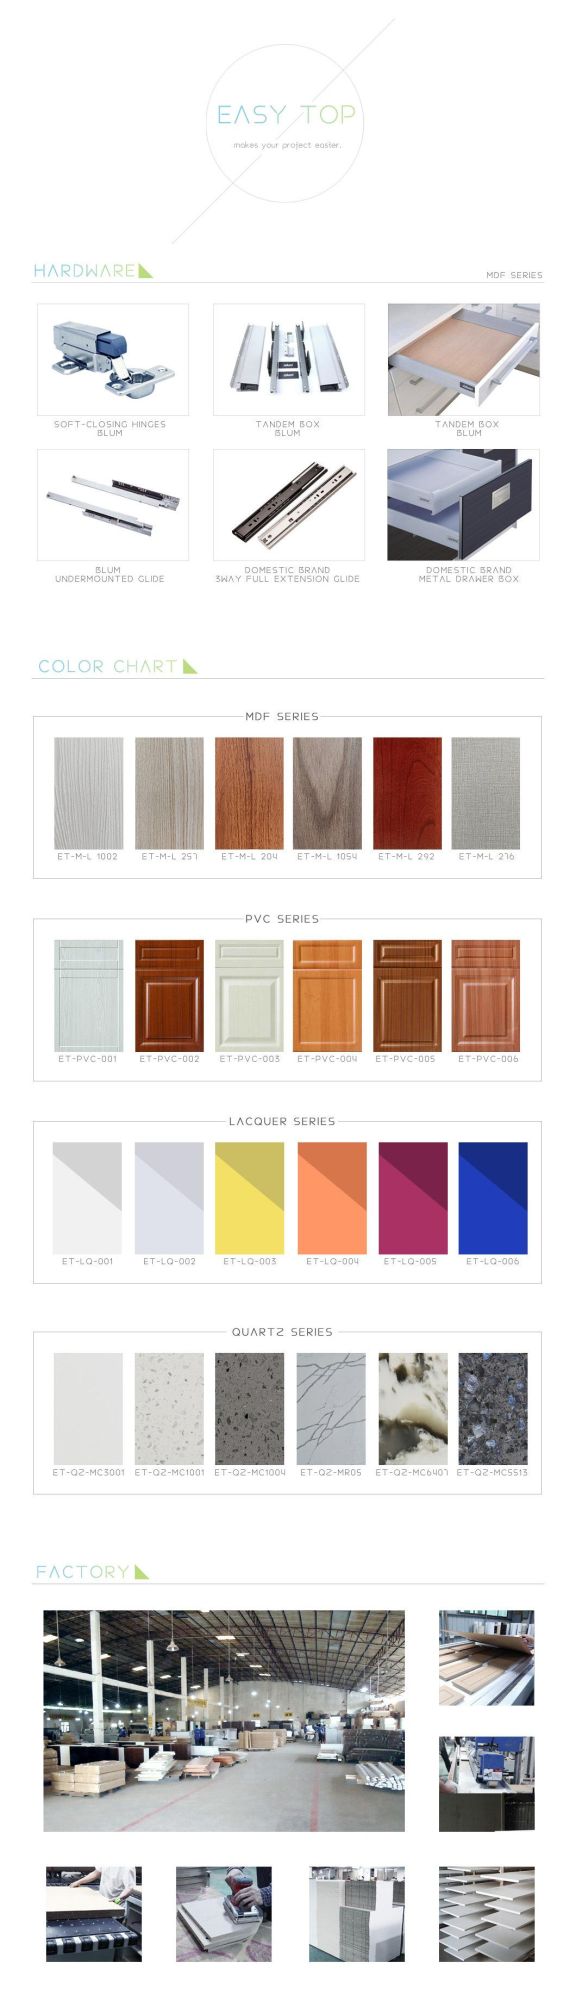 High Gloss Lacquer Board Simple Design Slab Wood Door Display Kitchen Cabinets Island for Sale